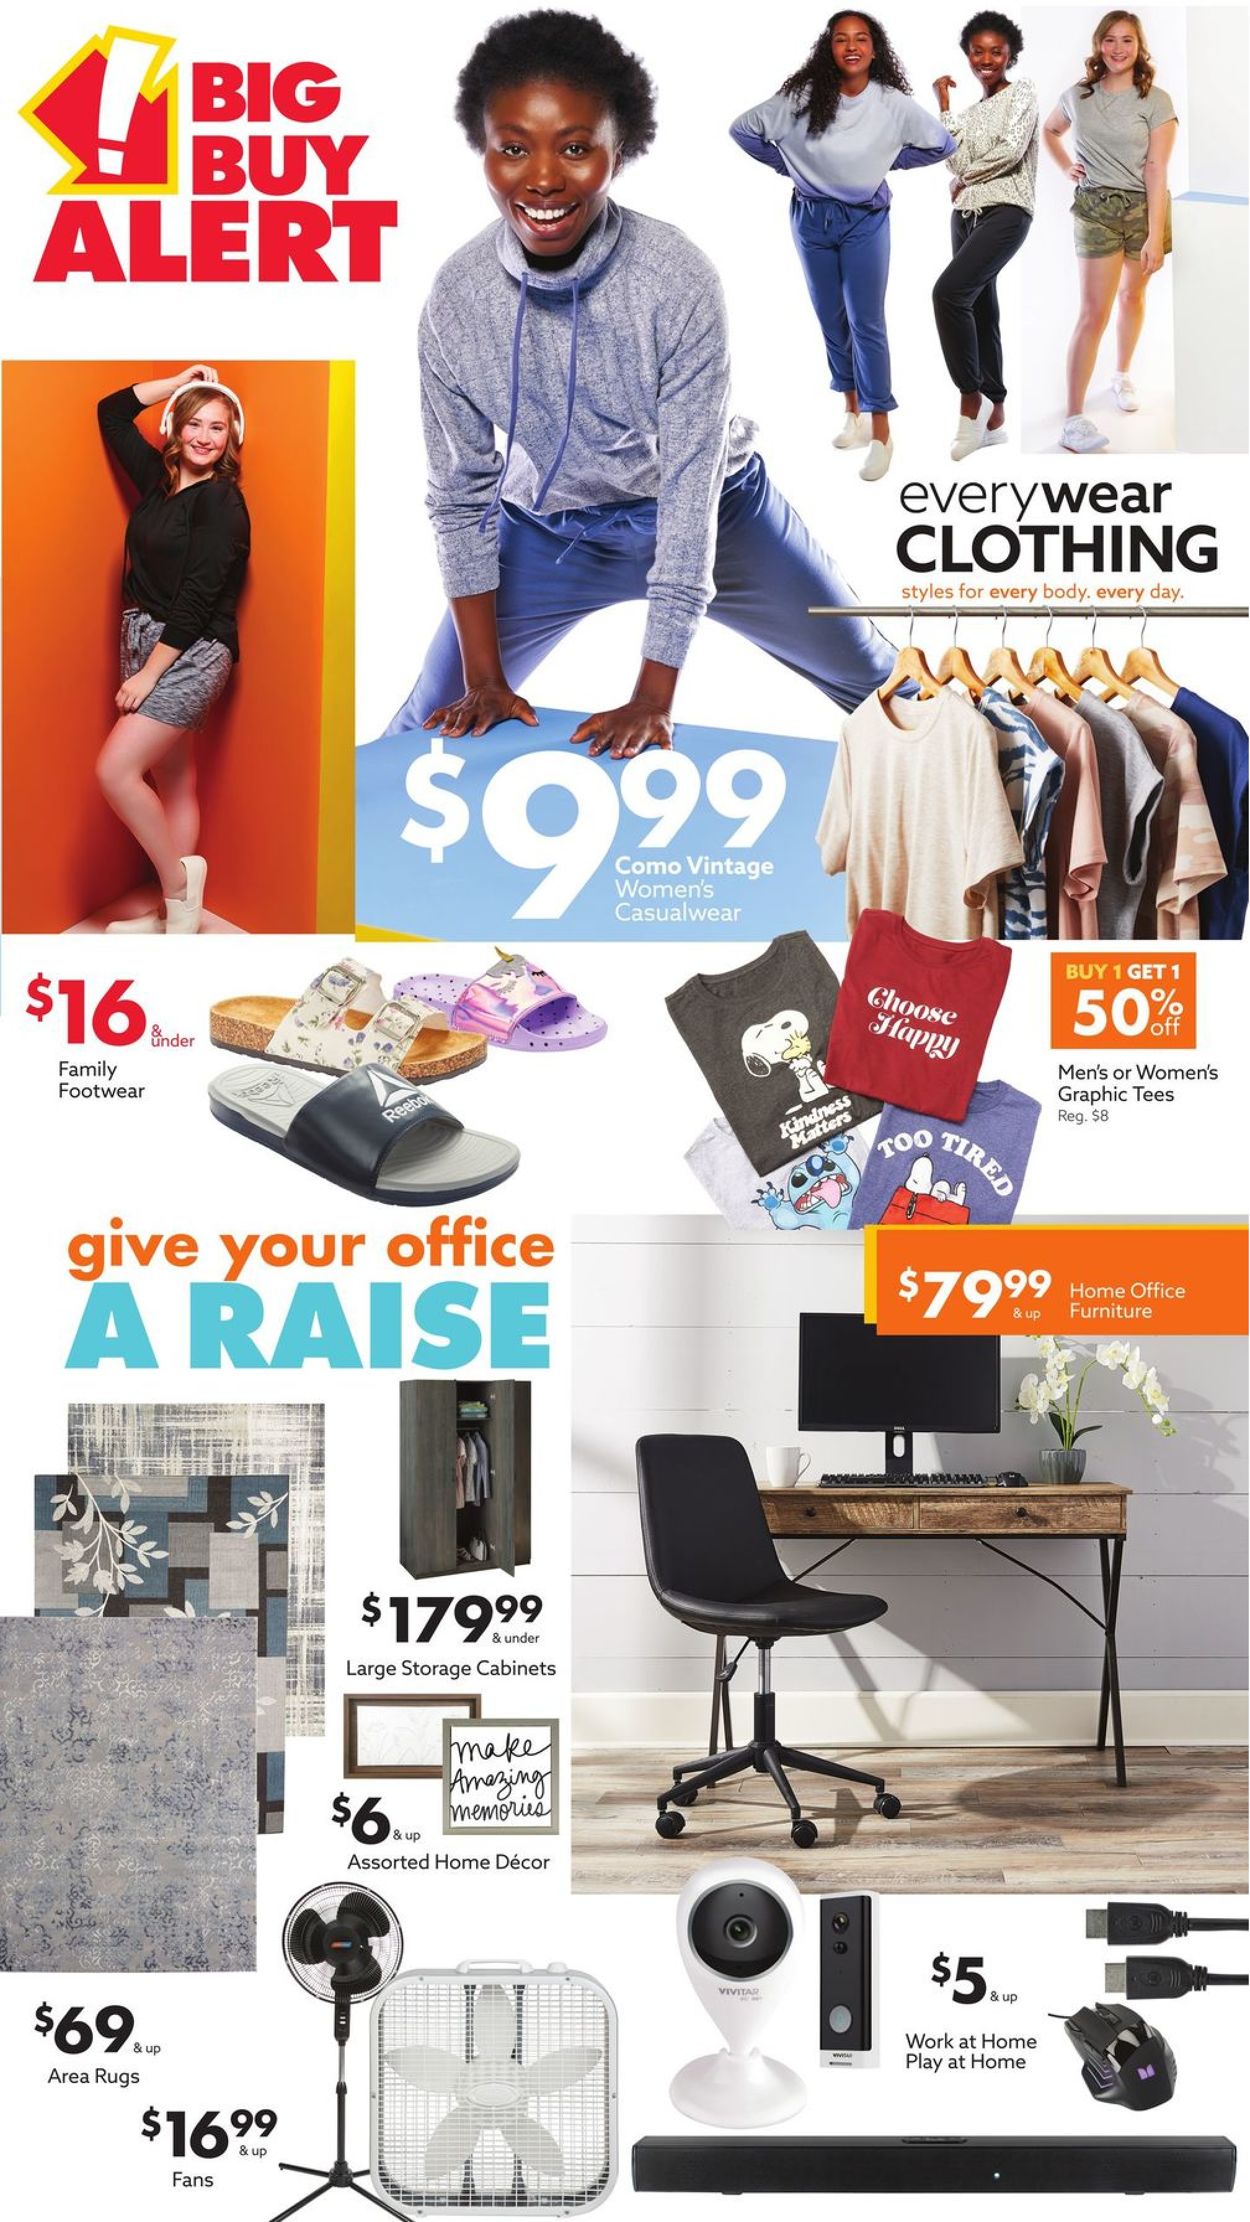 Catalogue Big Lots from 04/24/2021